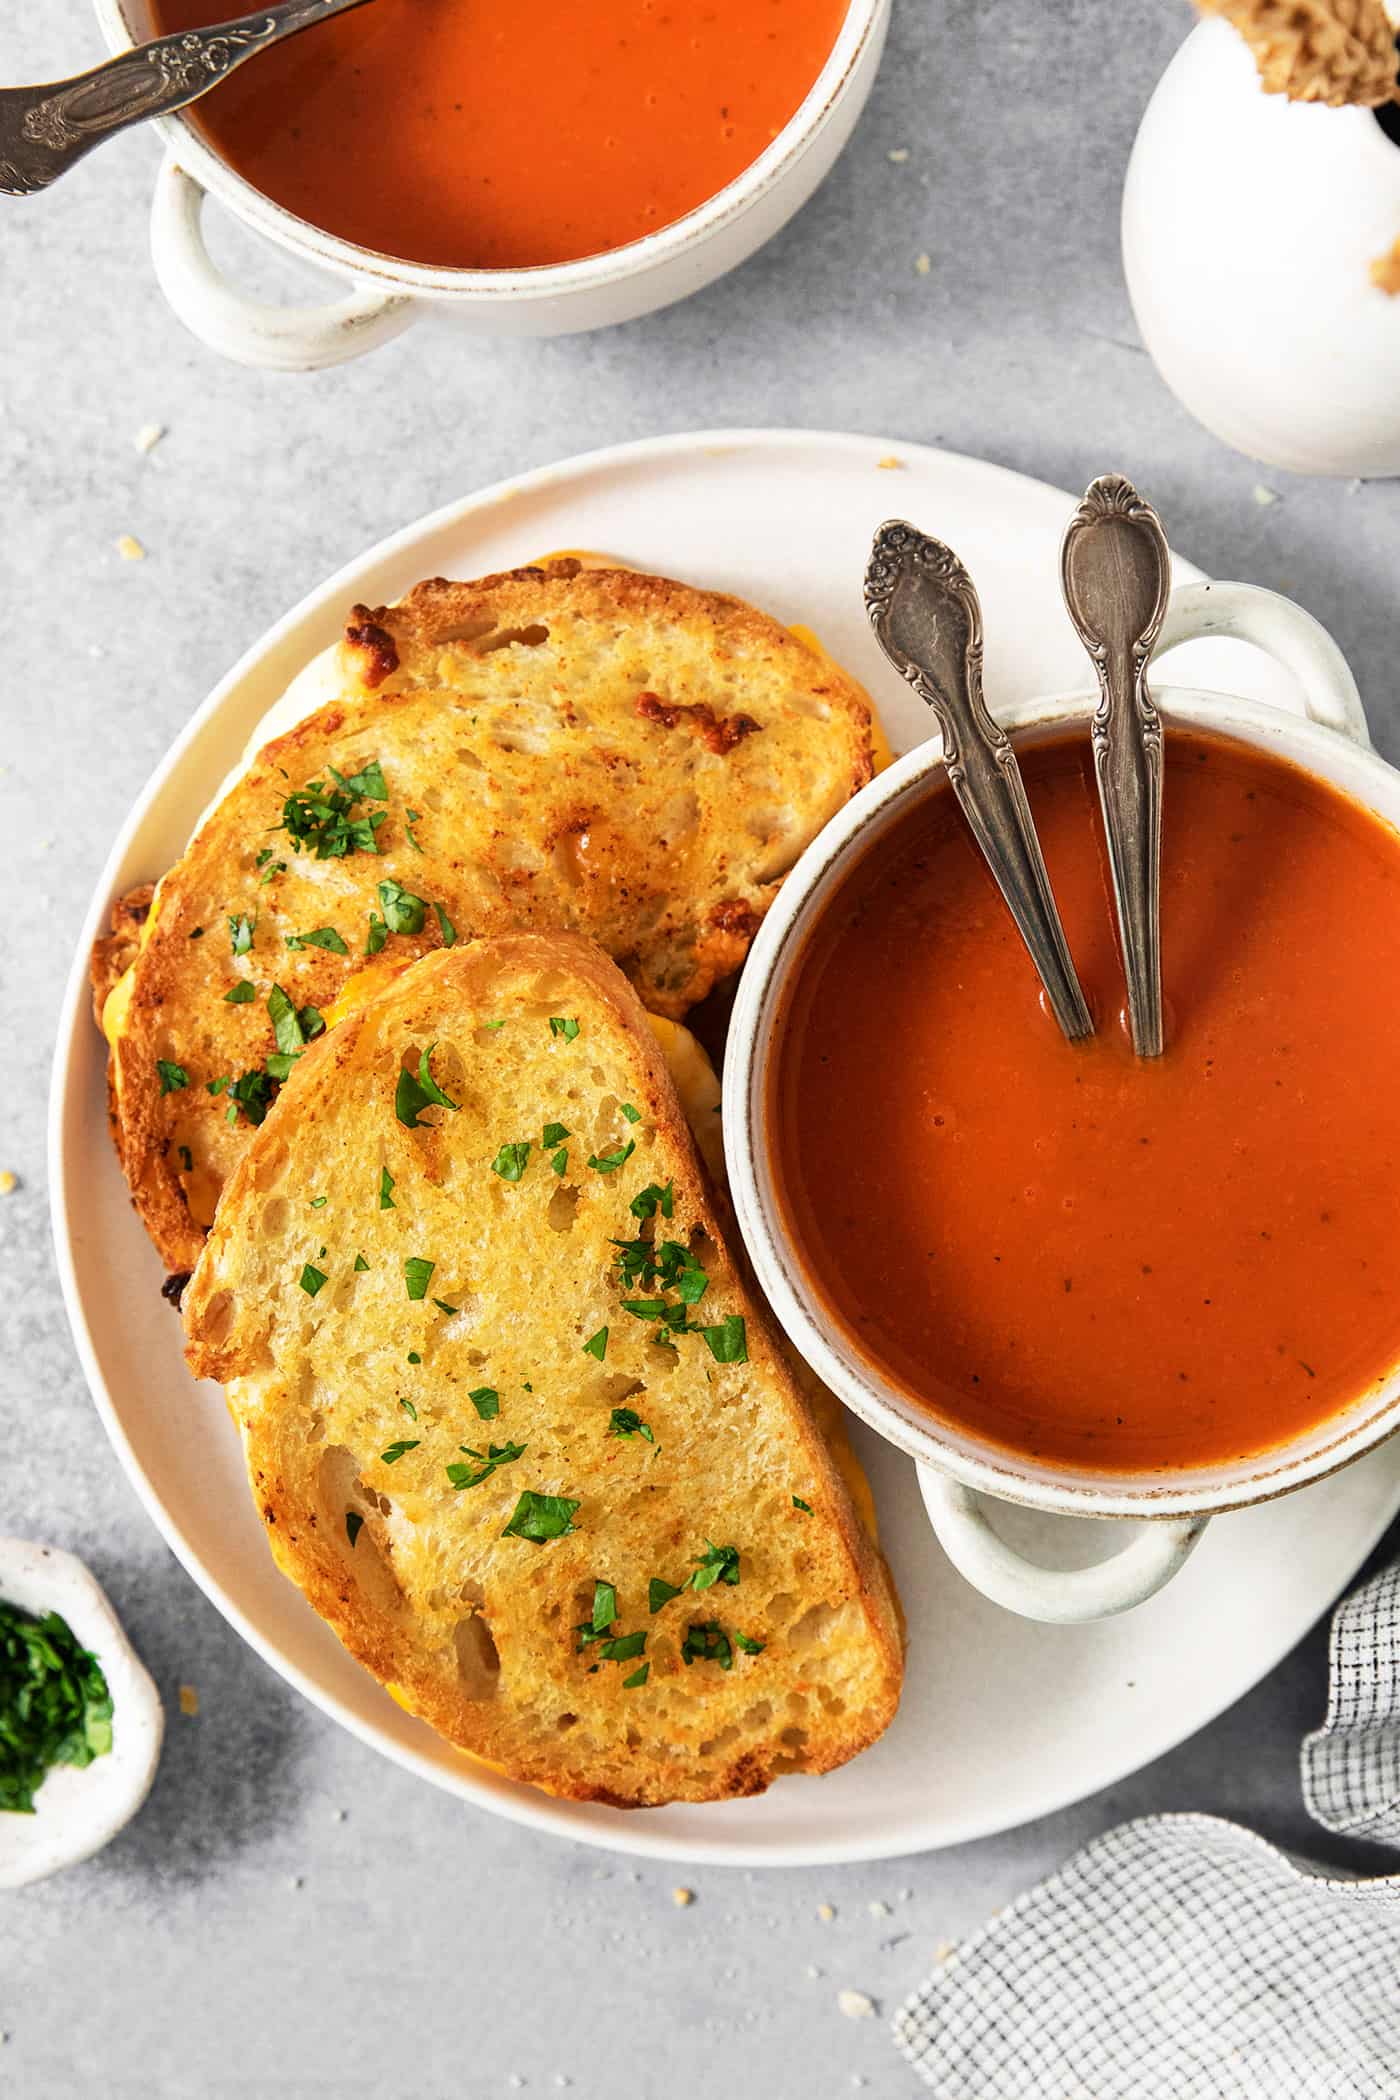 A white plate holds a small bowl of tomato soup with two spoons, and two air fryer grilled cheese sandwiches.